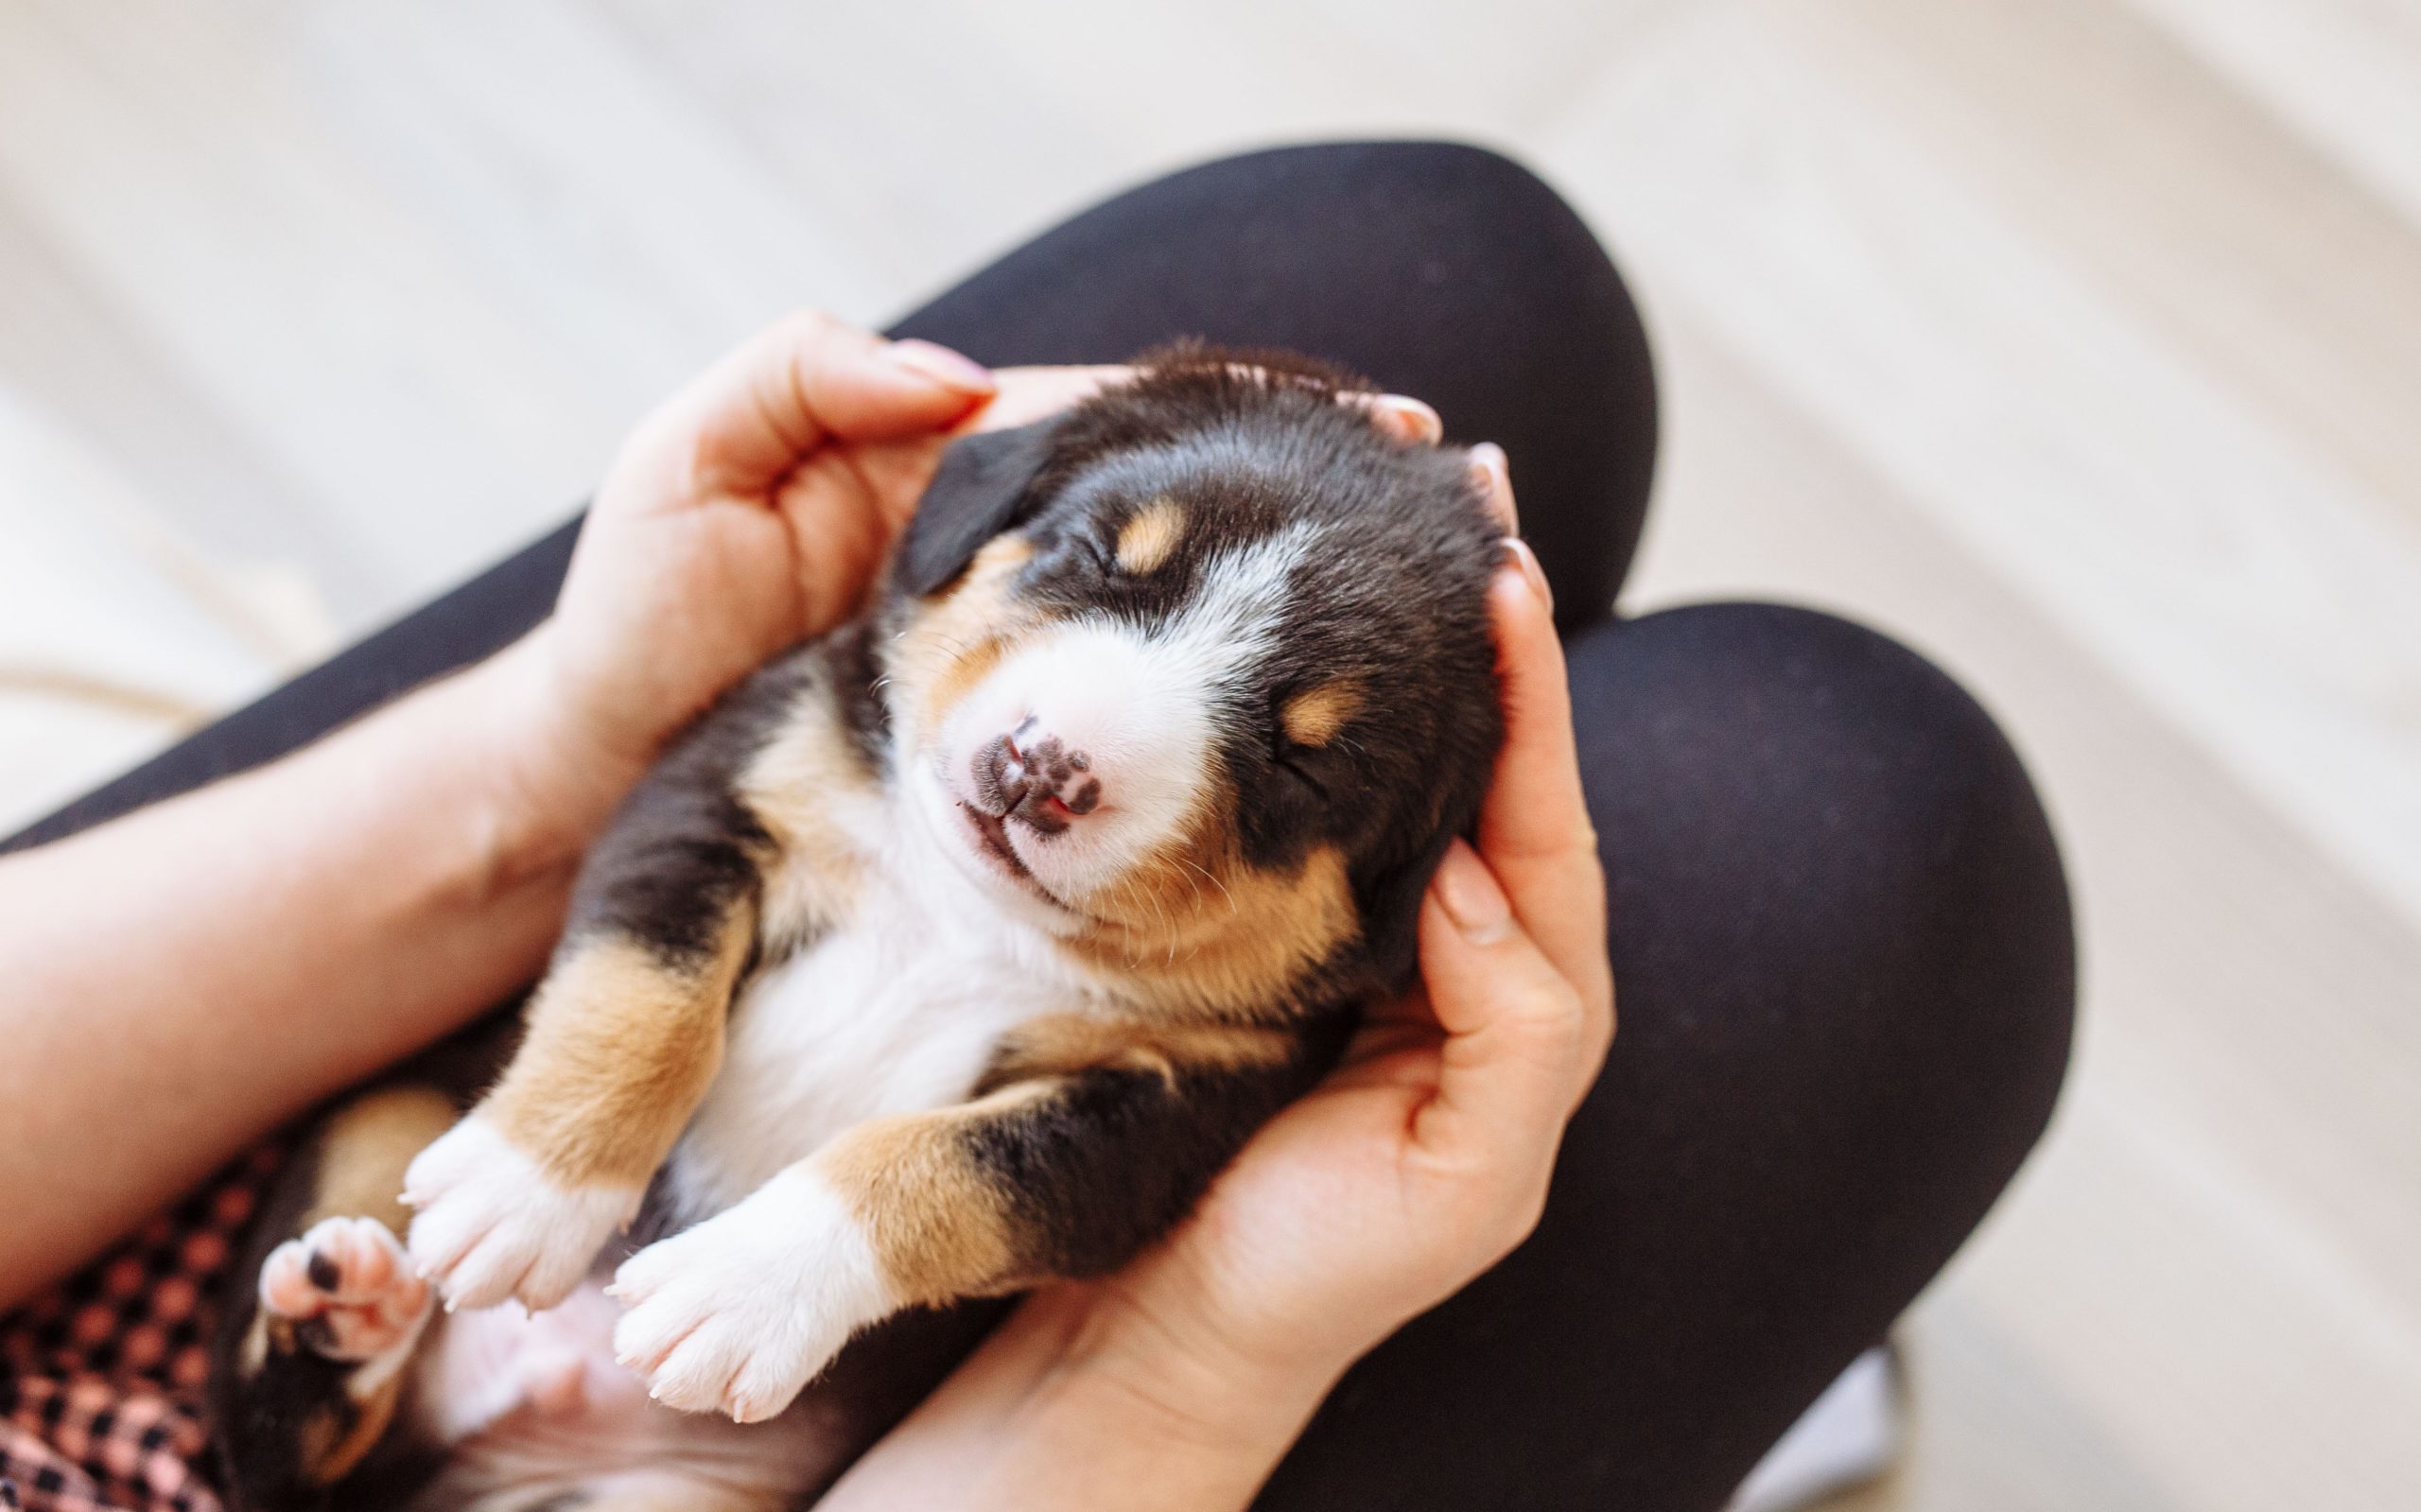 A puppy at home: how can you welcome him with serenity?